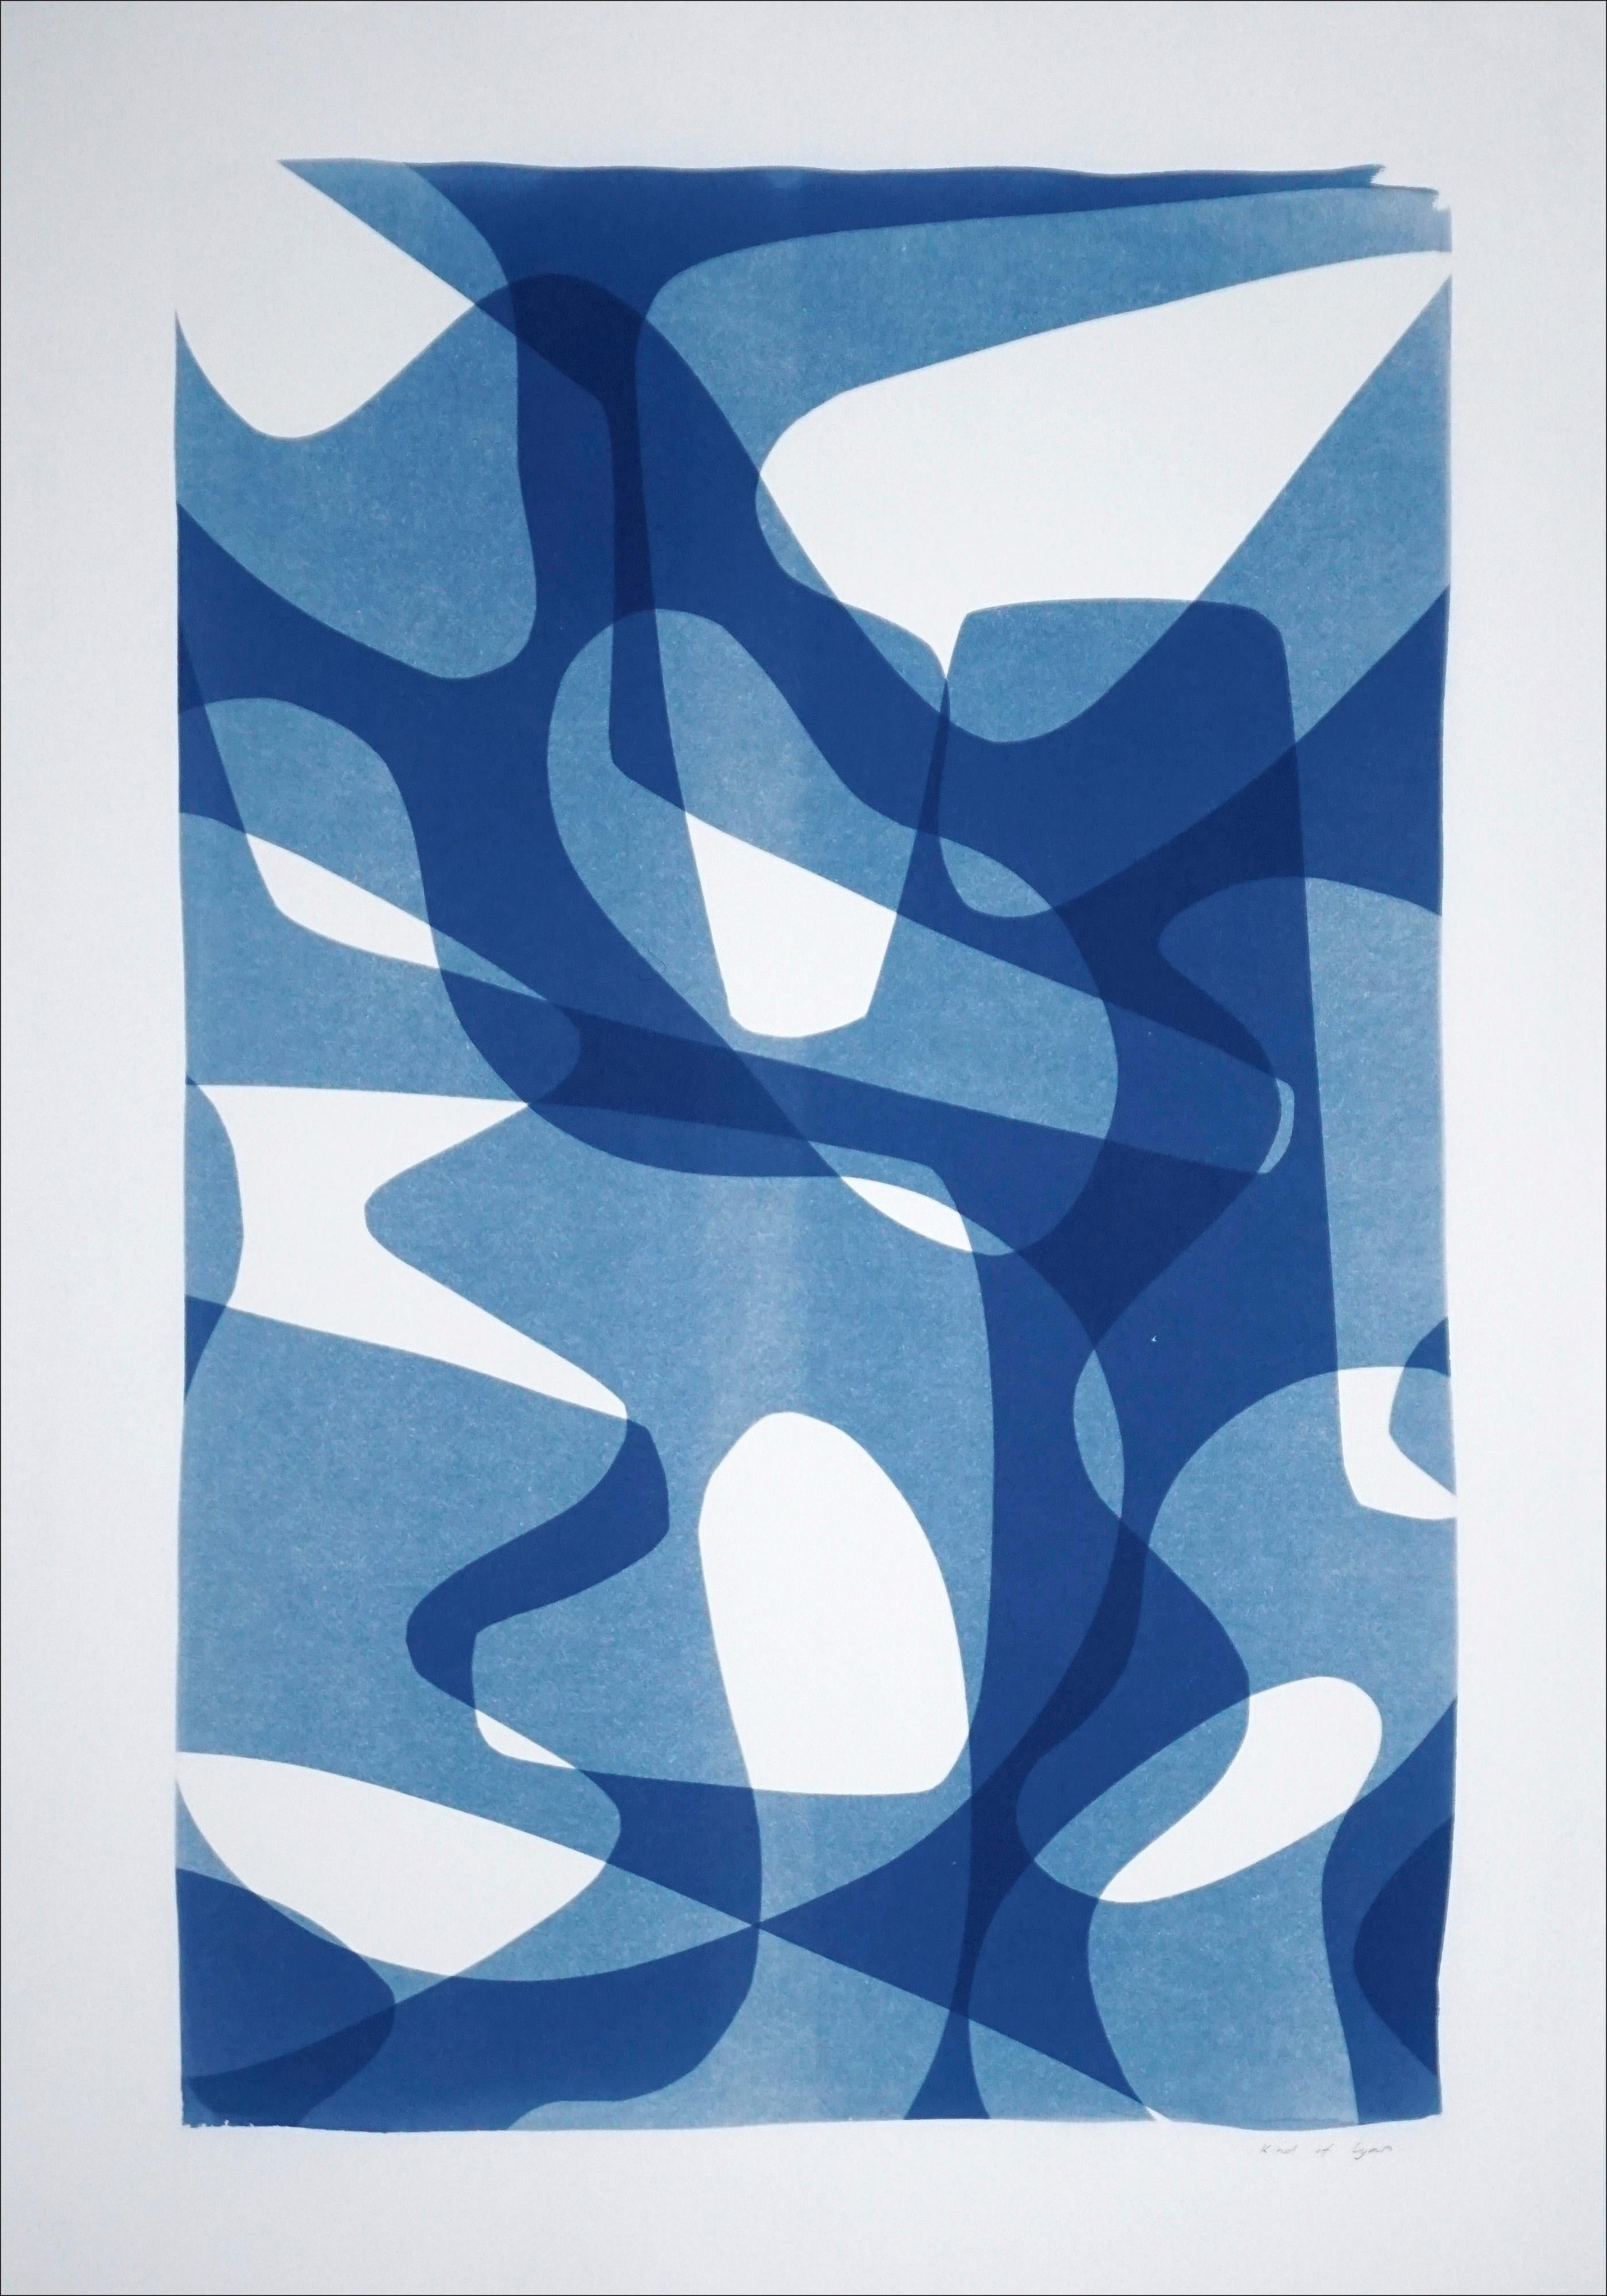 Jazzy Fifties Shapes, Blue Tones Vibrant Forms, Monotype, Cyanotype on Paper